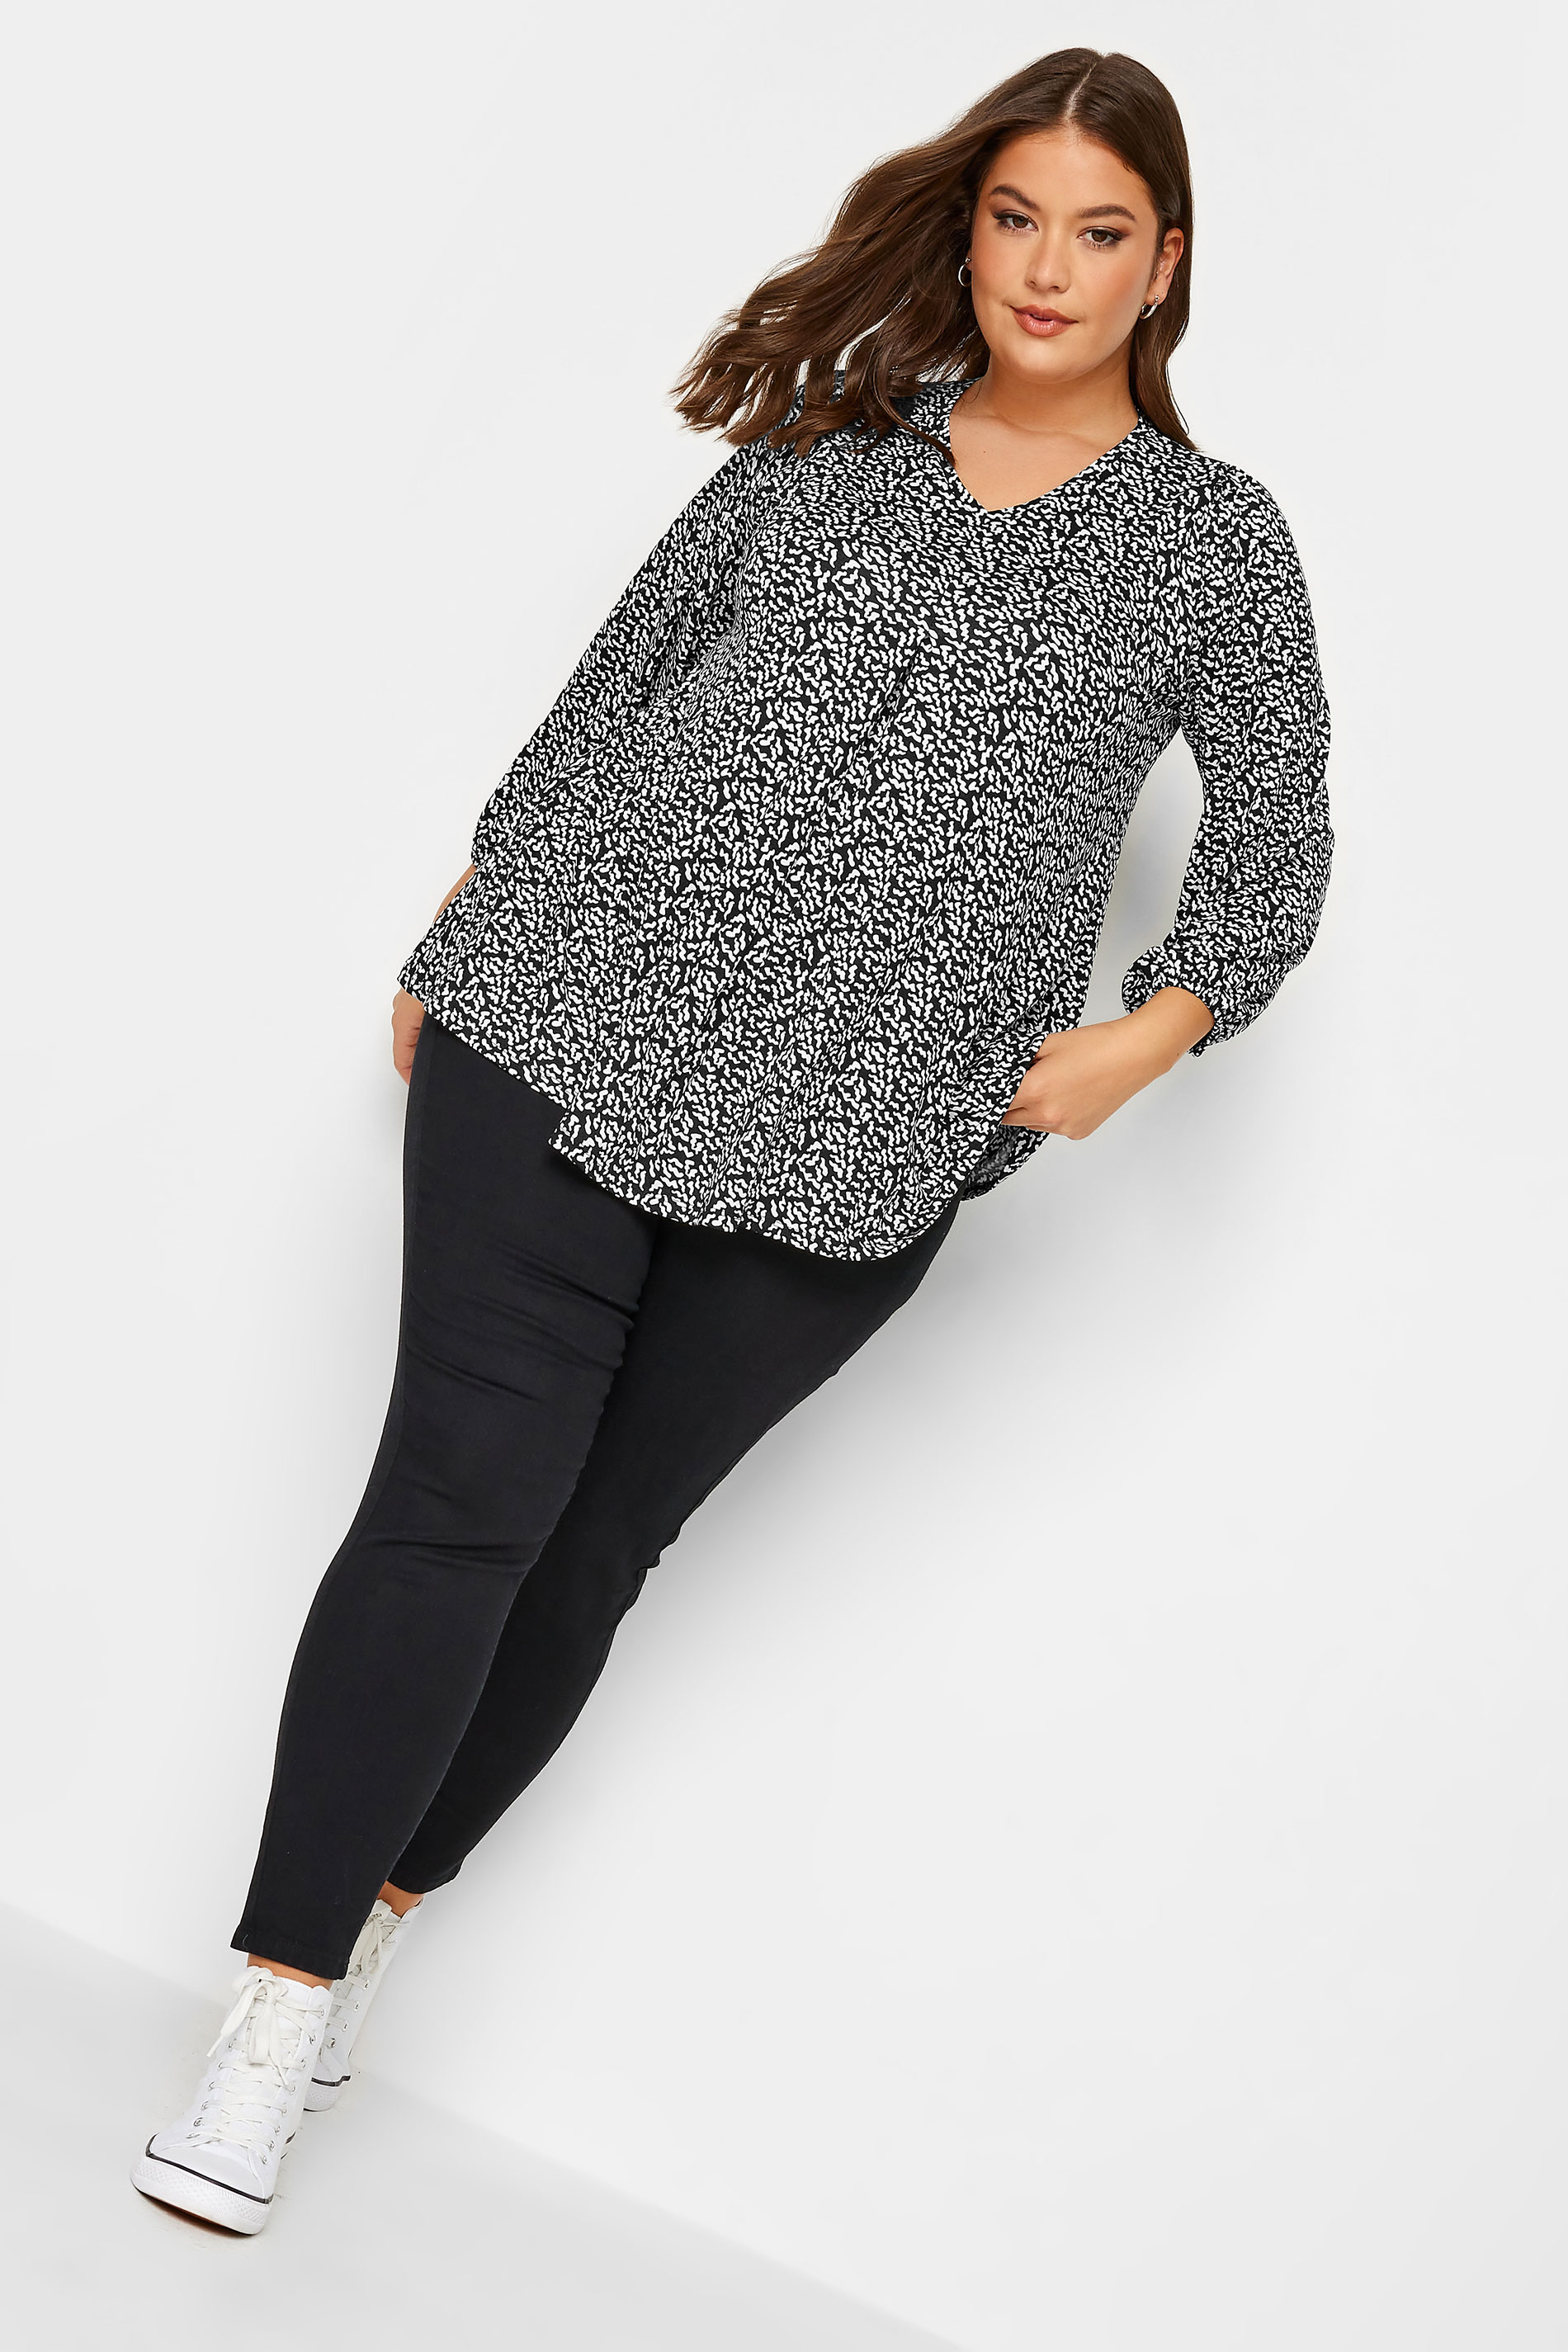 YOURS Plus Size Black Animal Markings Print Balloon Sleeve Top | Yours Clothing 3